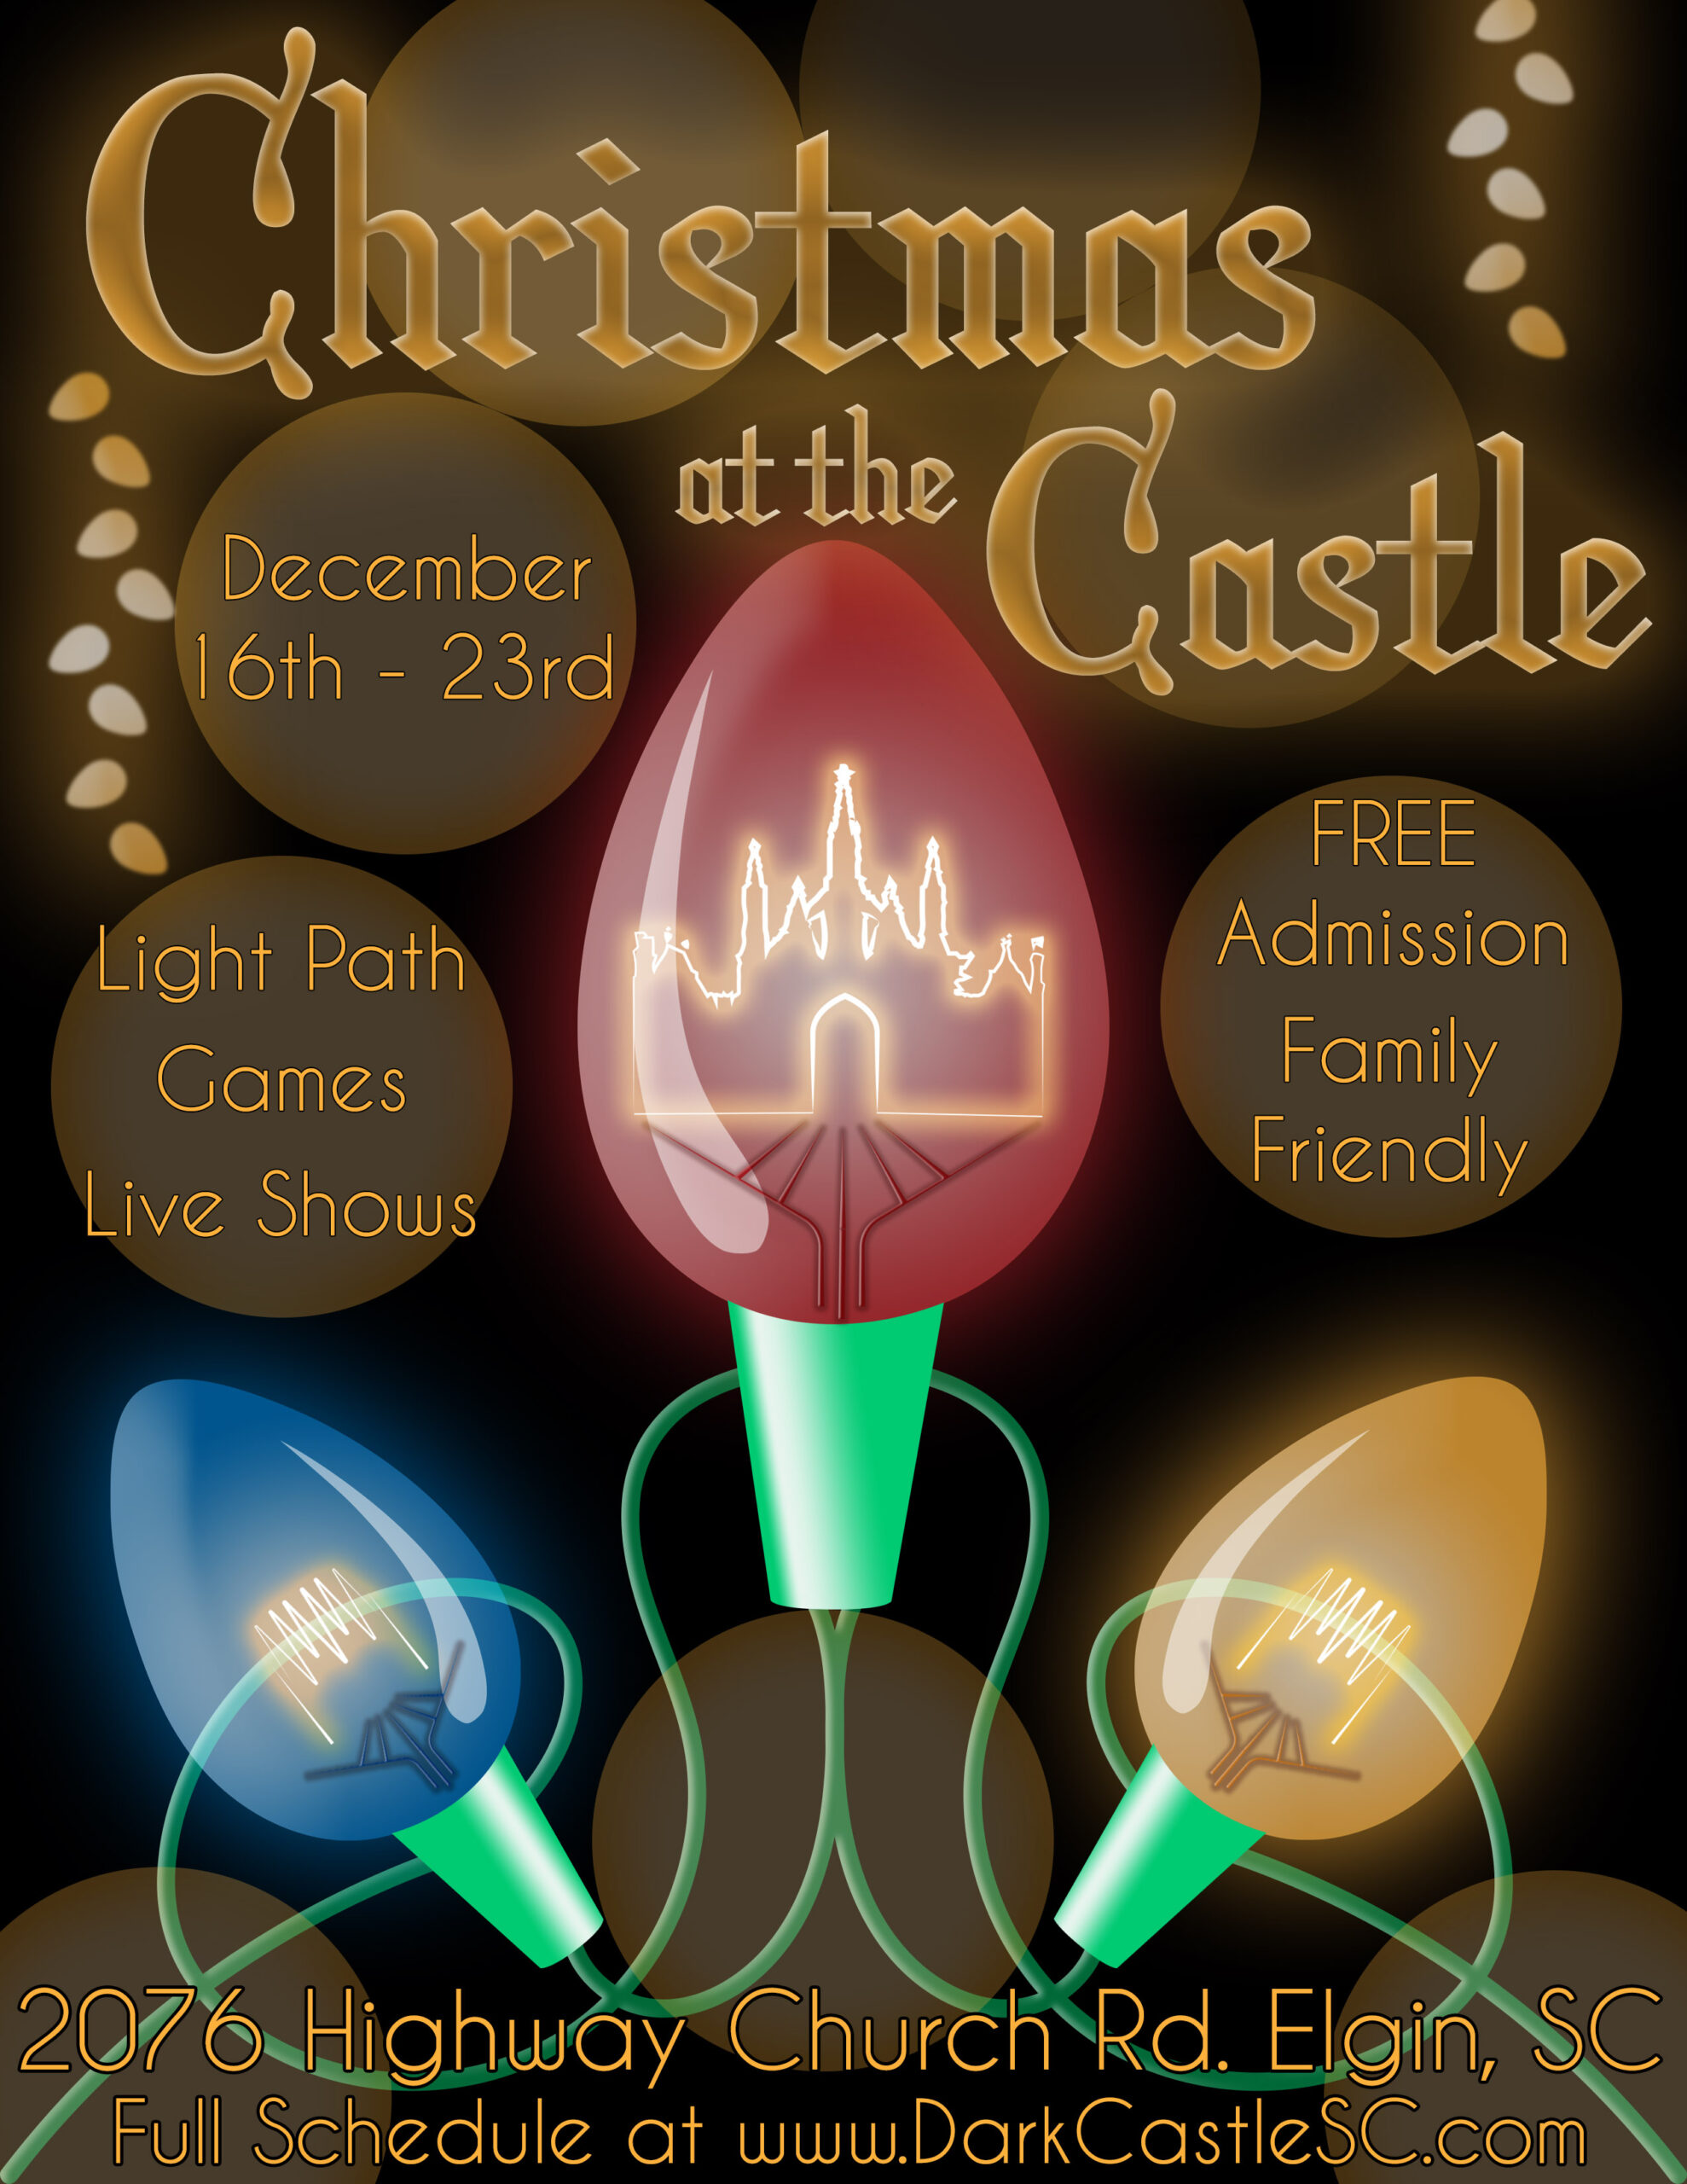 Christmas at The Castle brings you games, live shows and a light path through the woods with 15000+ lights